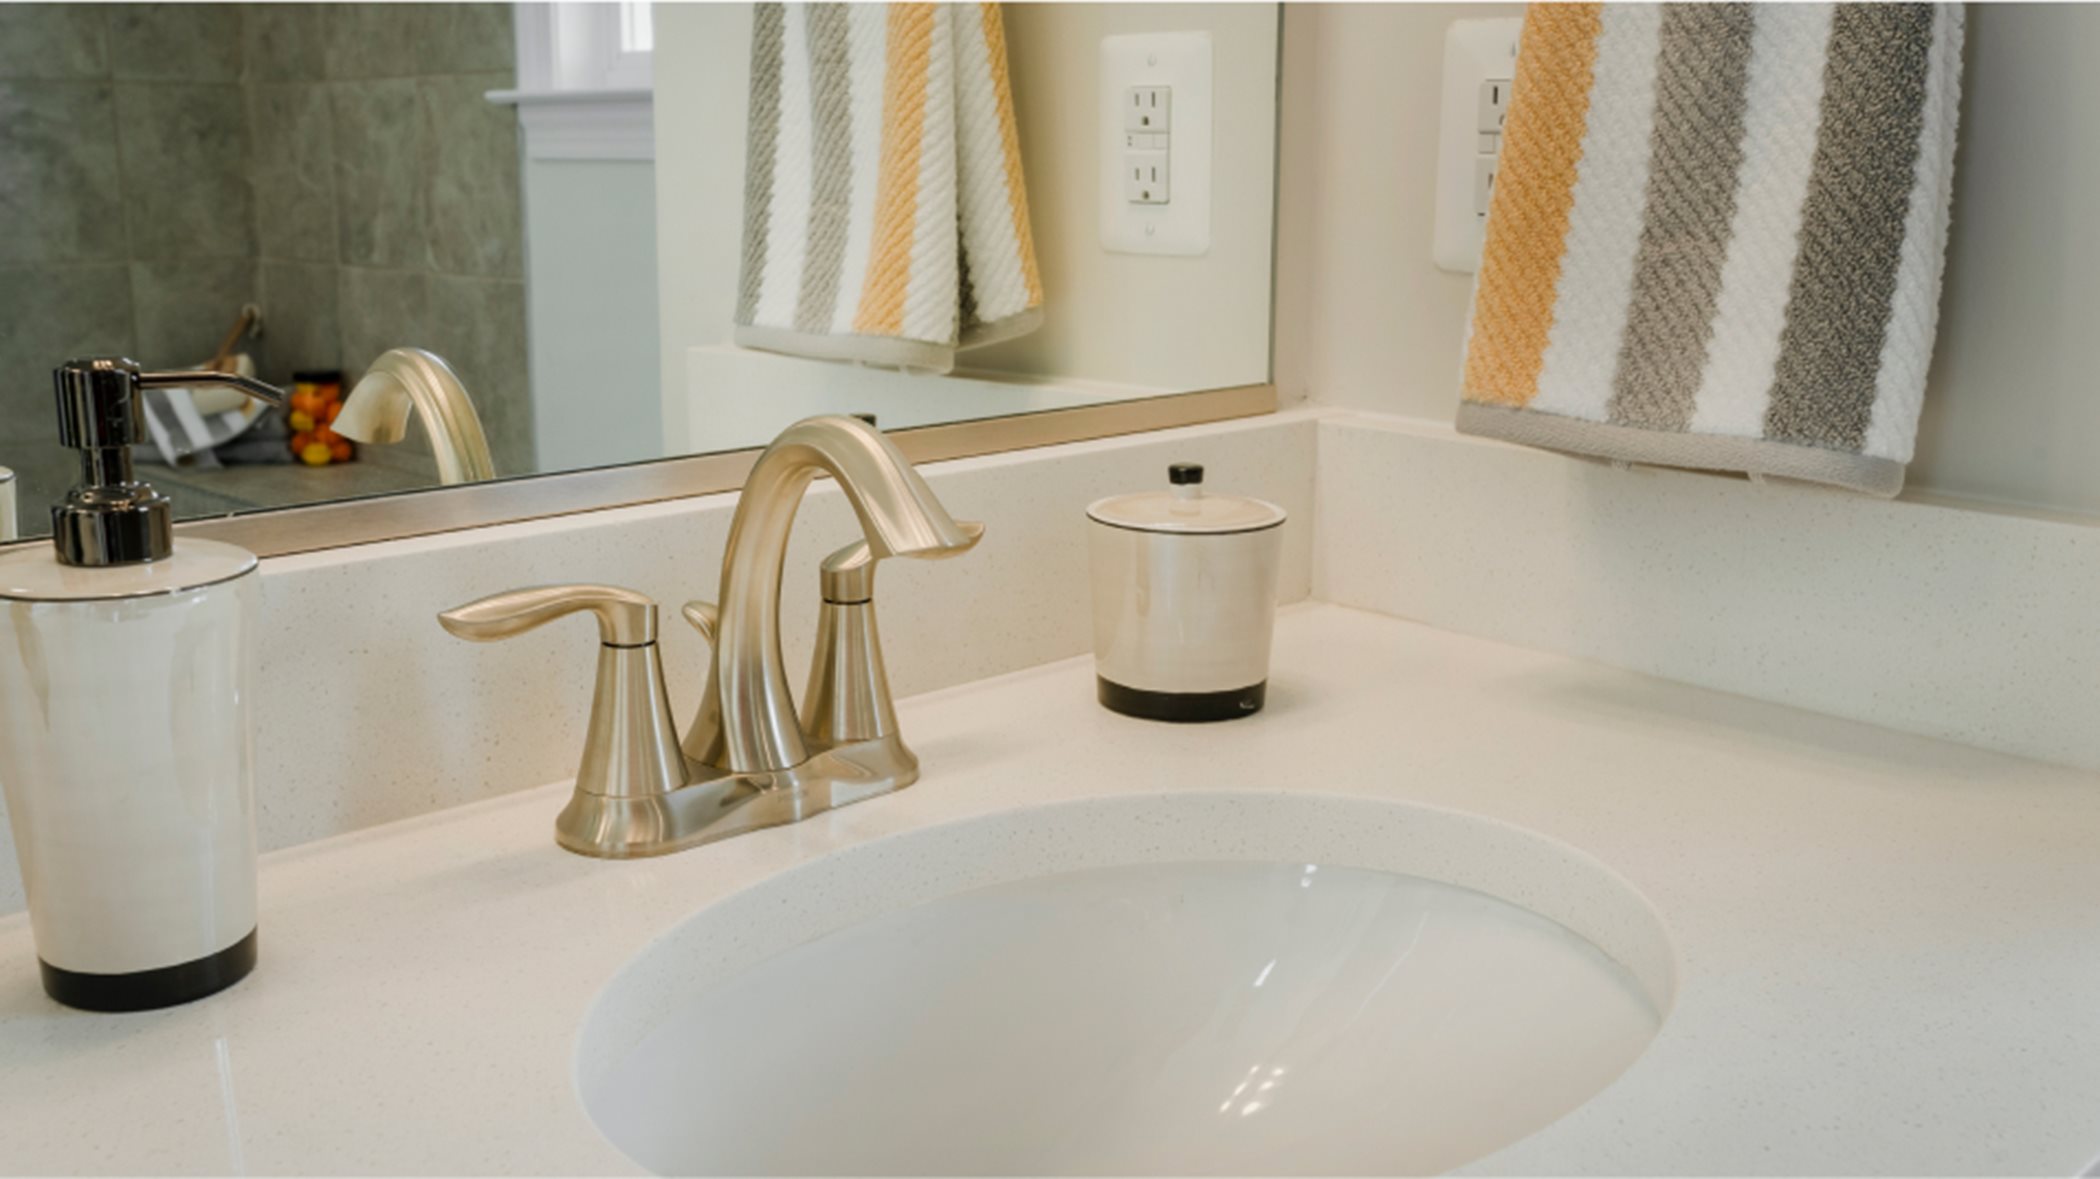 Chesapeake Owners Suite Bathroom Sink and Faucet